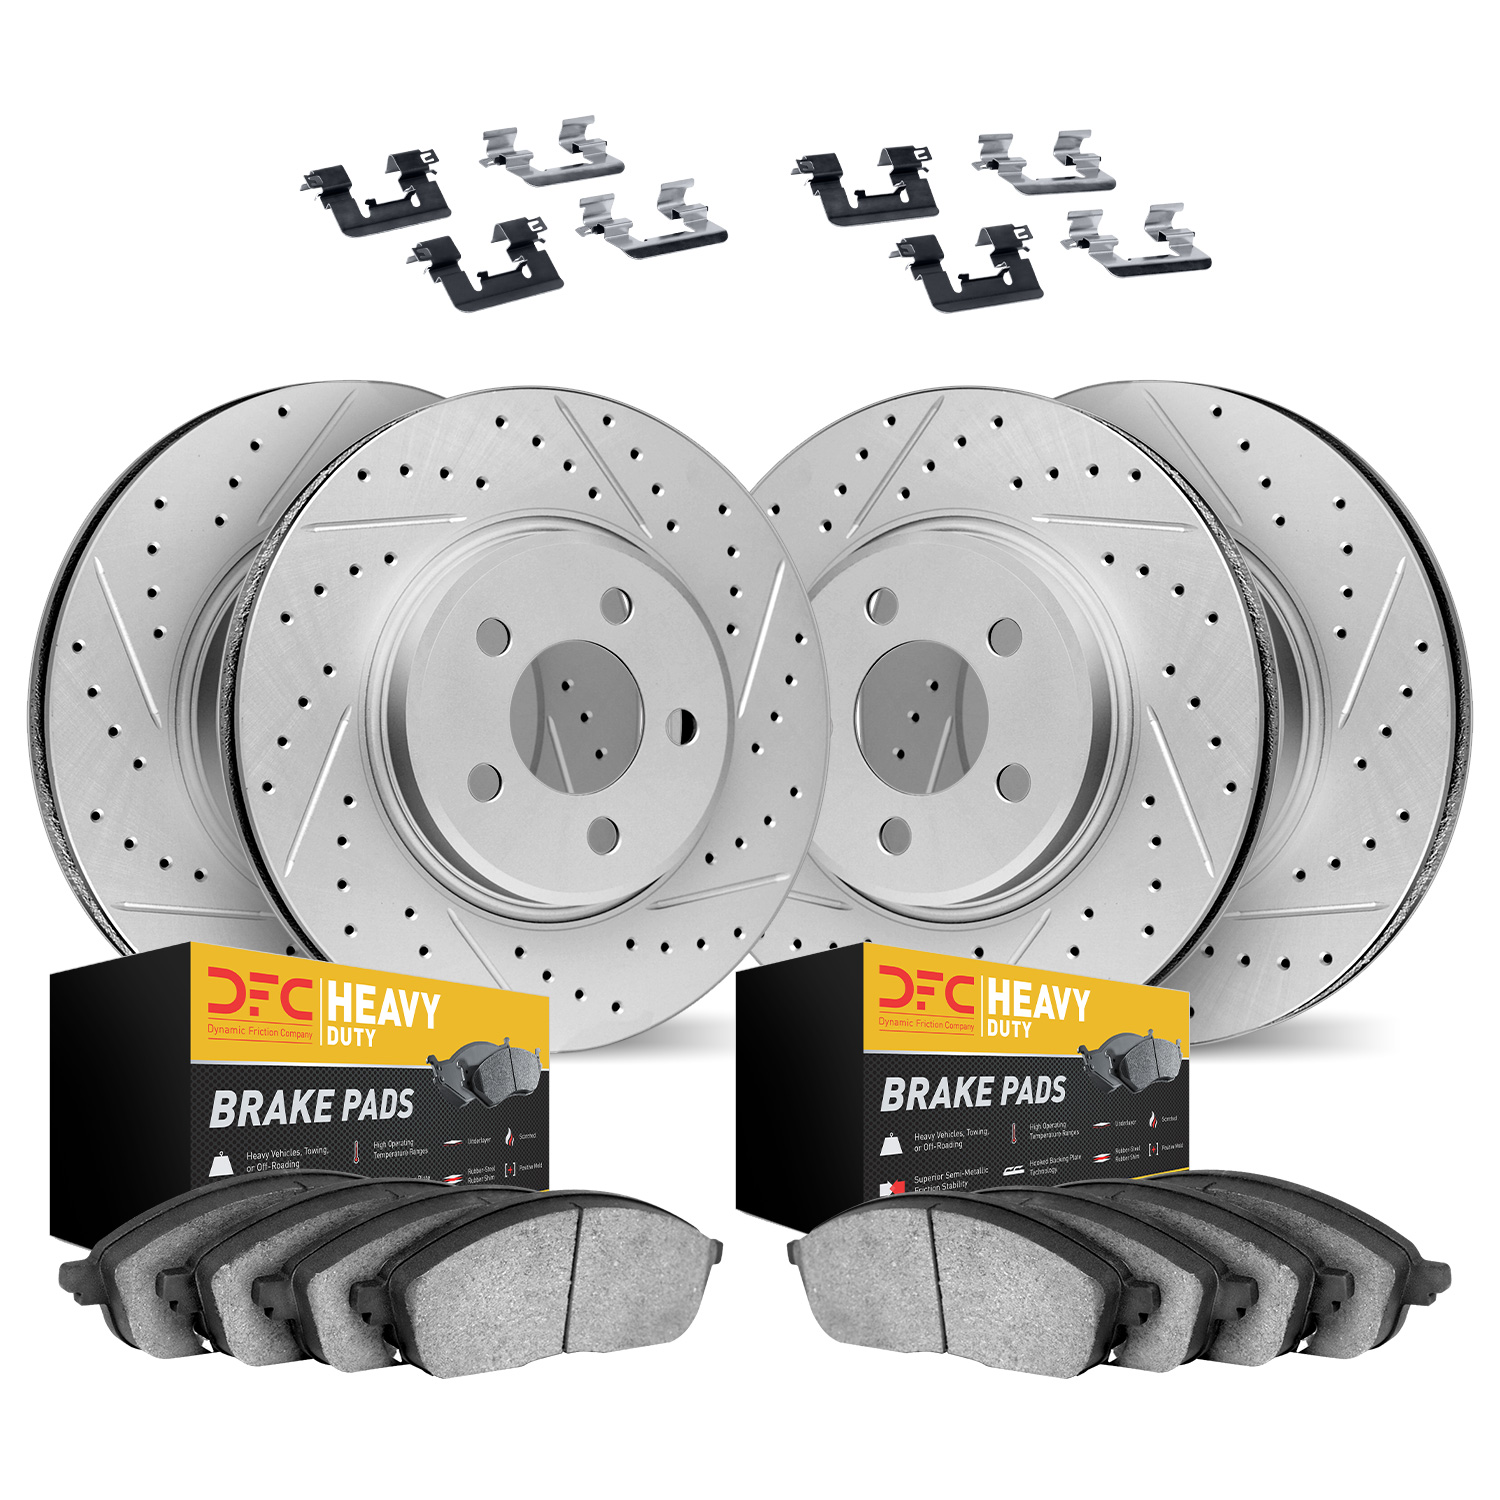 2214-99027 Geoperformance Drilled/Slotted Rotors w/Heavy-Duty Pads Kit & Hardware, 2010-2011 Ford/Lincoln/Mercury/Mazda, Positio